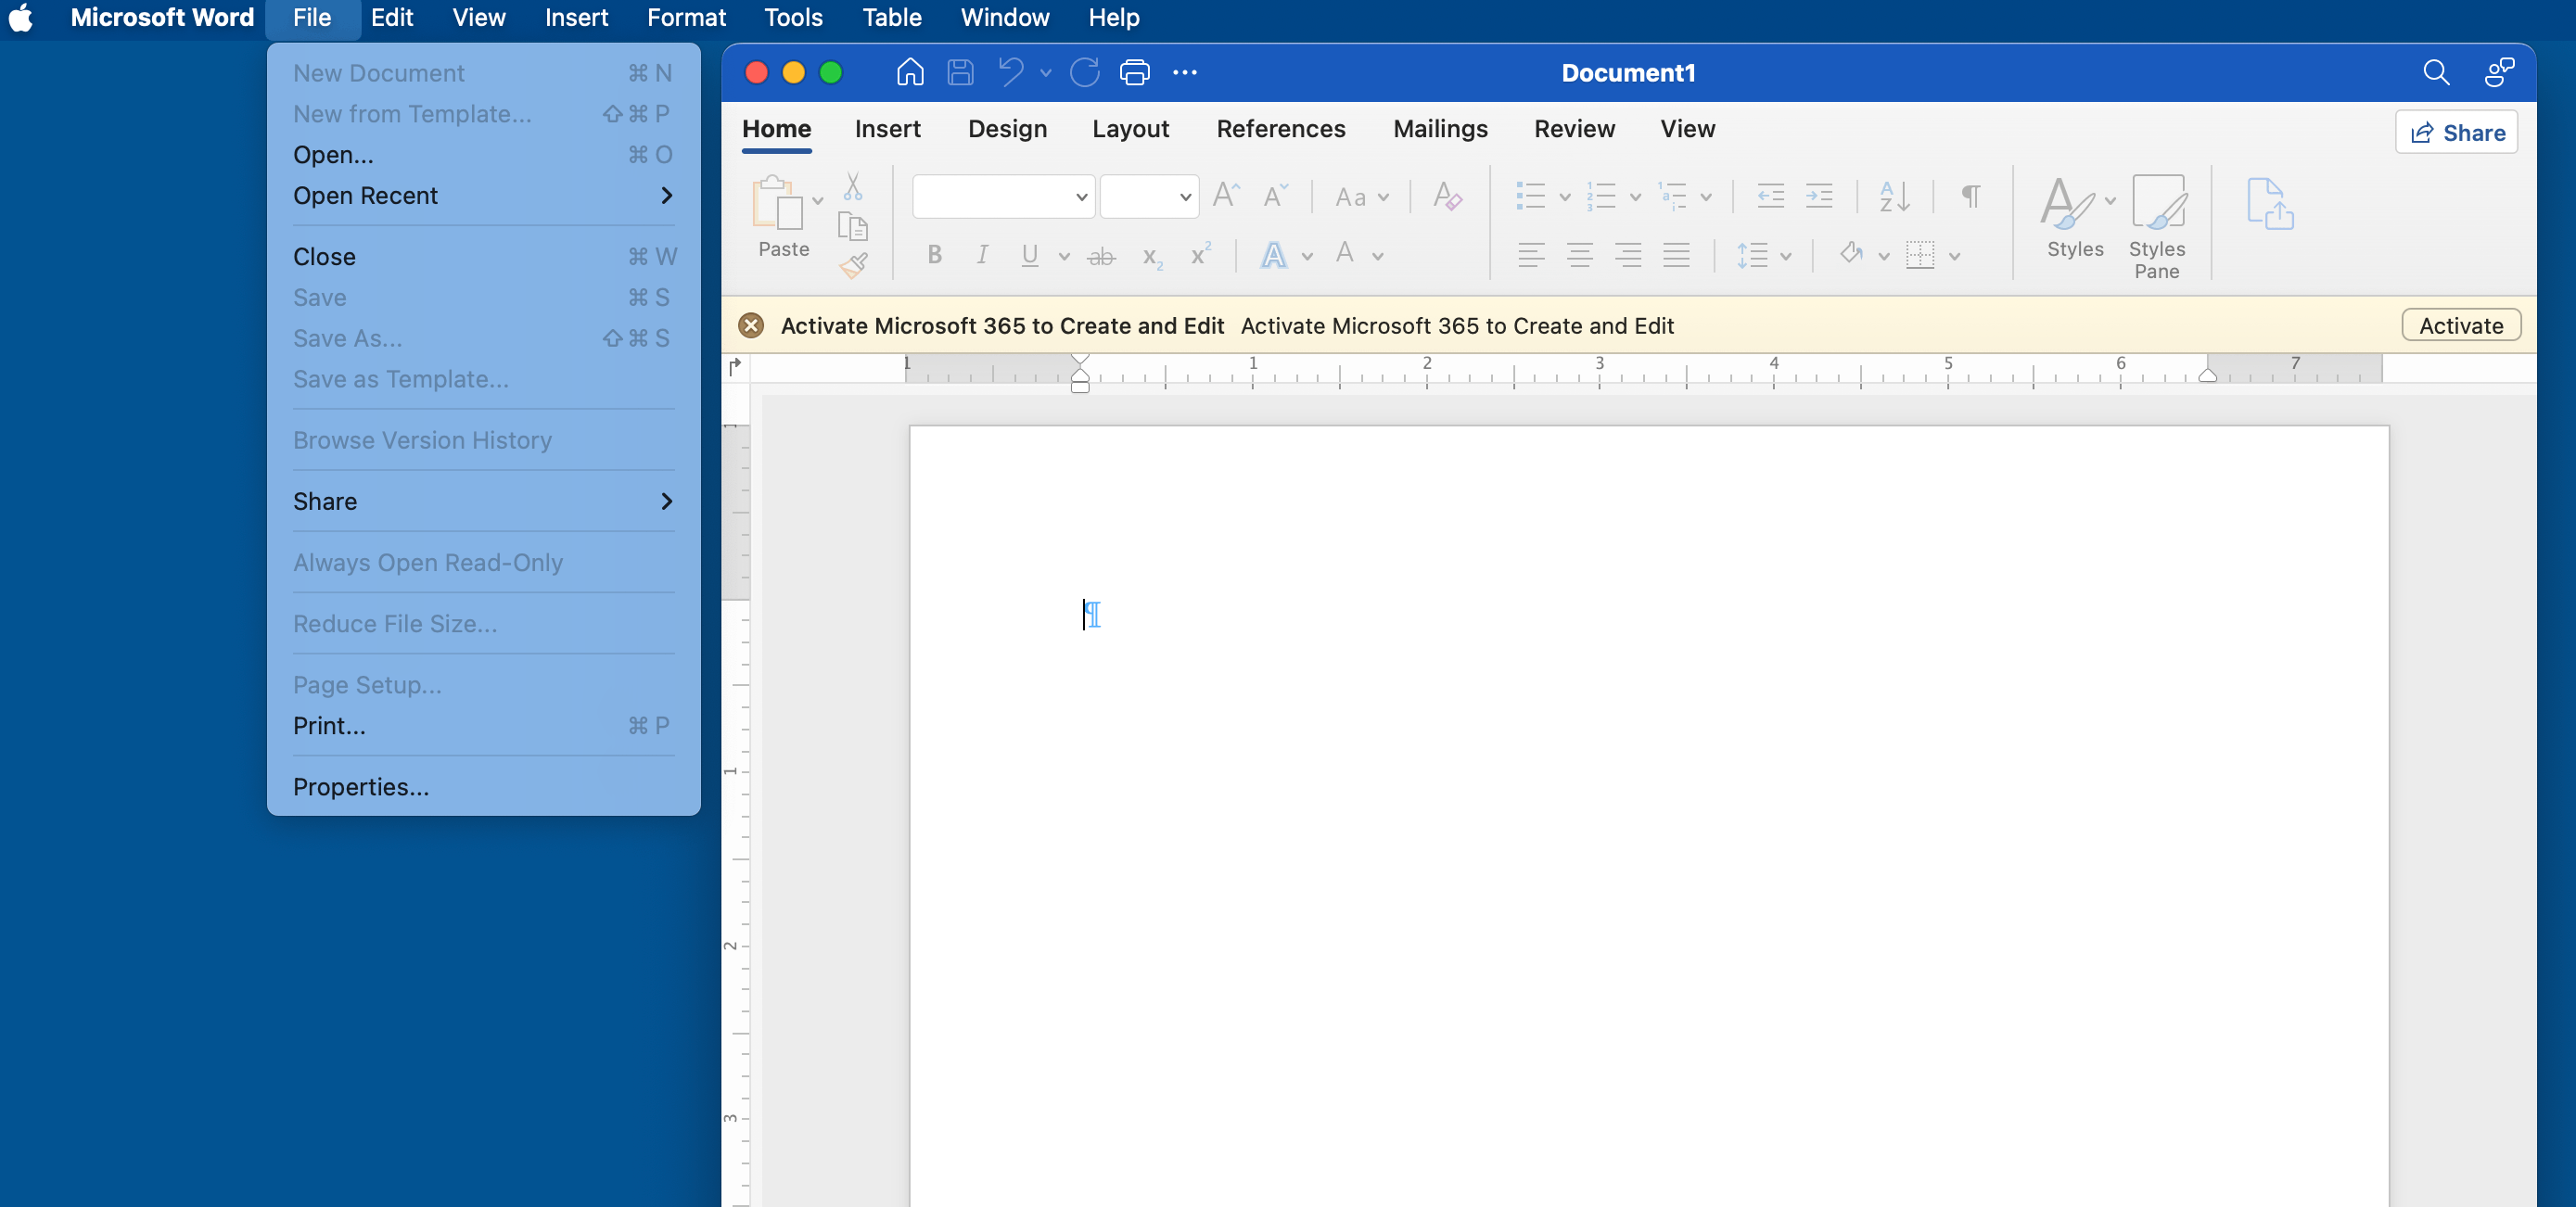 Cannot use Word in Office 2021 - Microsoft Community